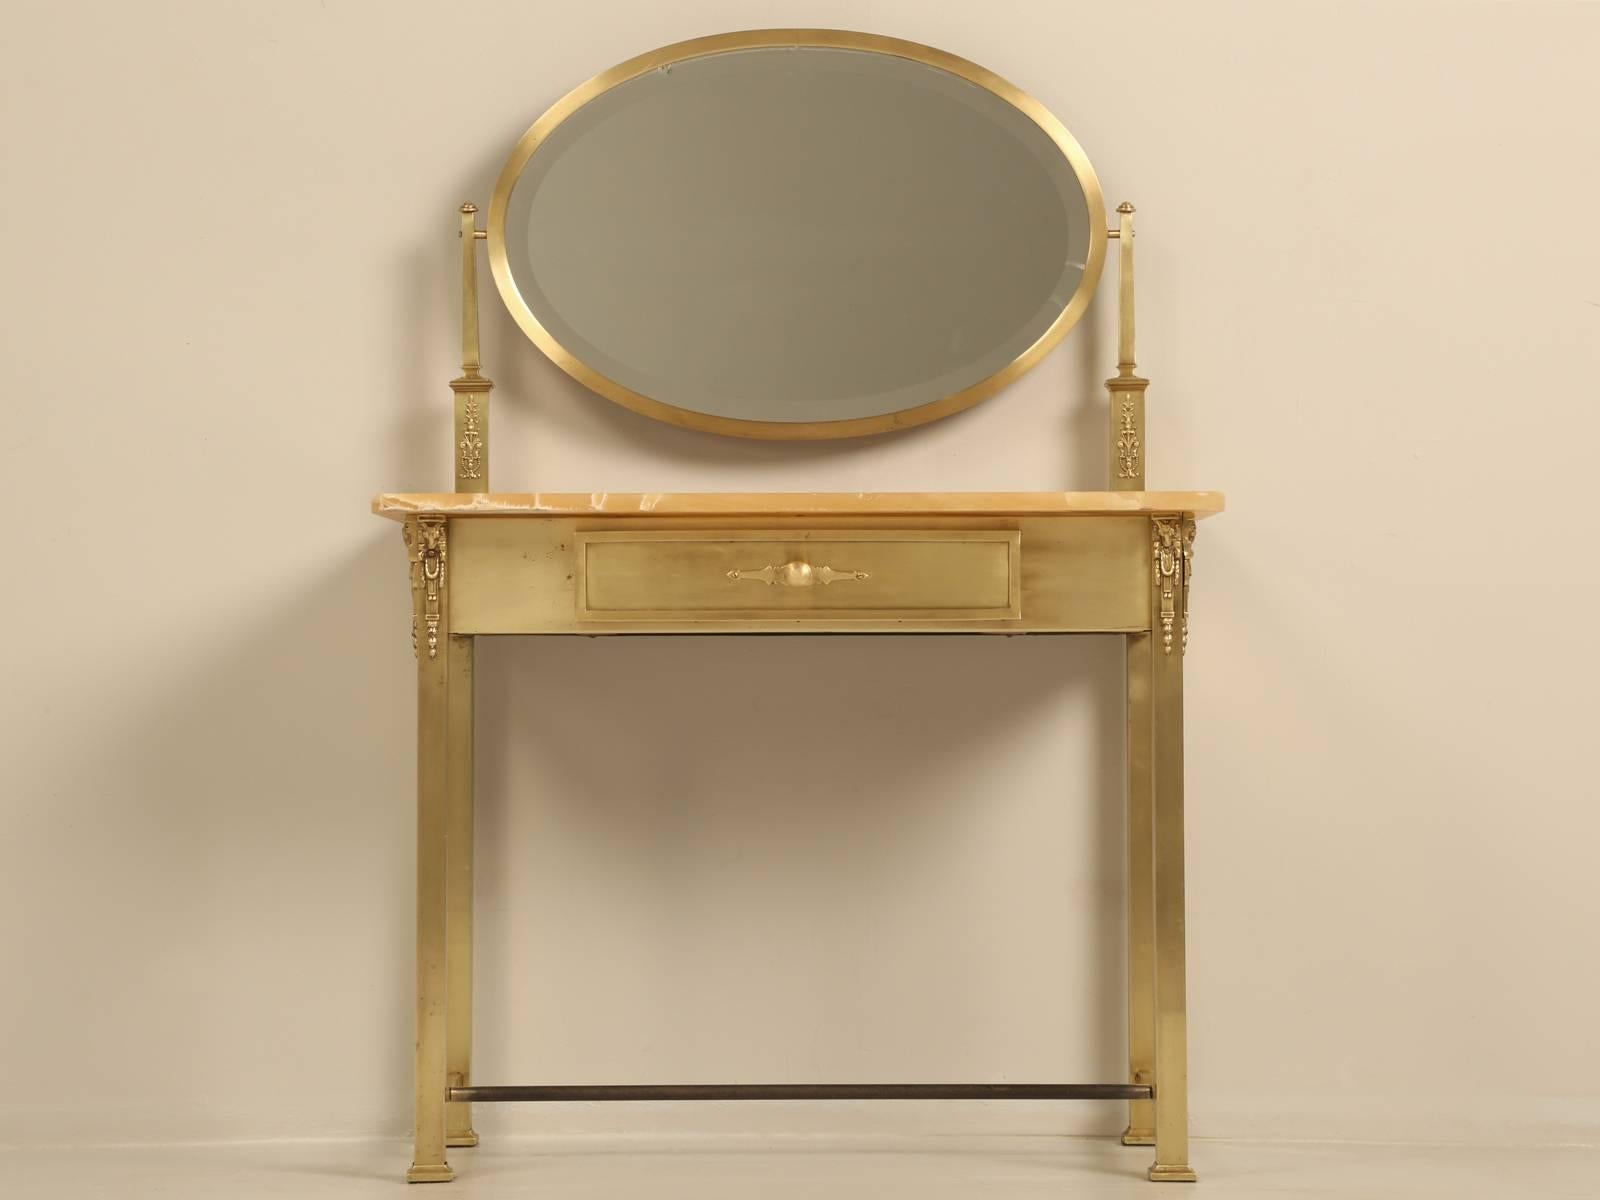 French dressing table or potential bathroom vanity, constructed of onyx and solid brass with matching mirror. Because onyx is a soft stone there, will be minor surface scratches and we included a blowup picture of one chip. Ideal for a vessel